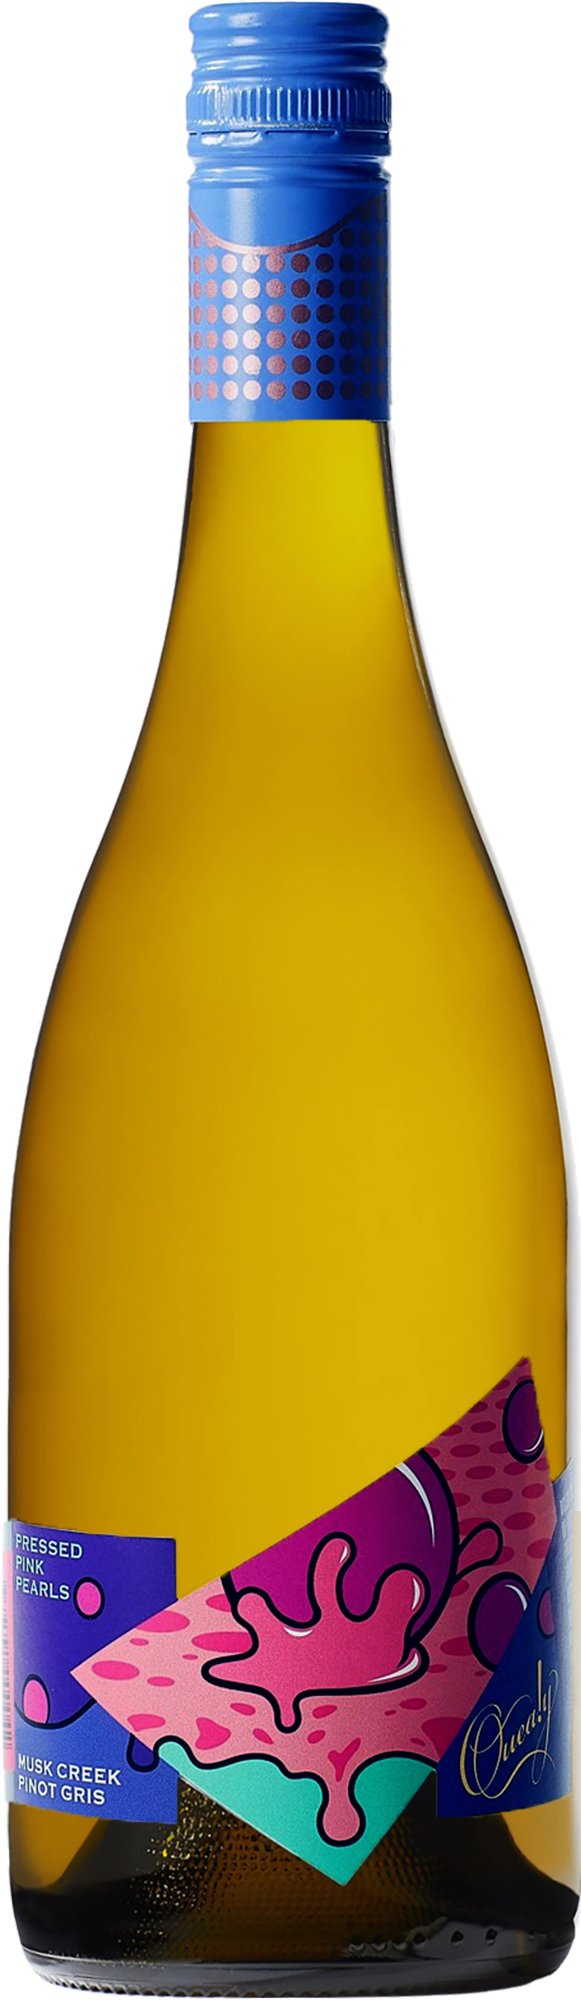 Quealy Musk Creek Pinot Gris 2021